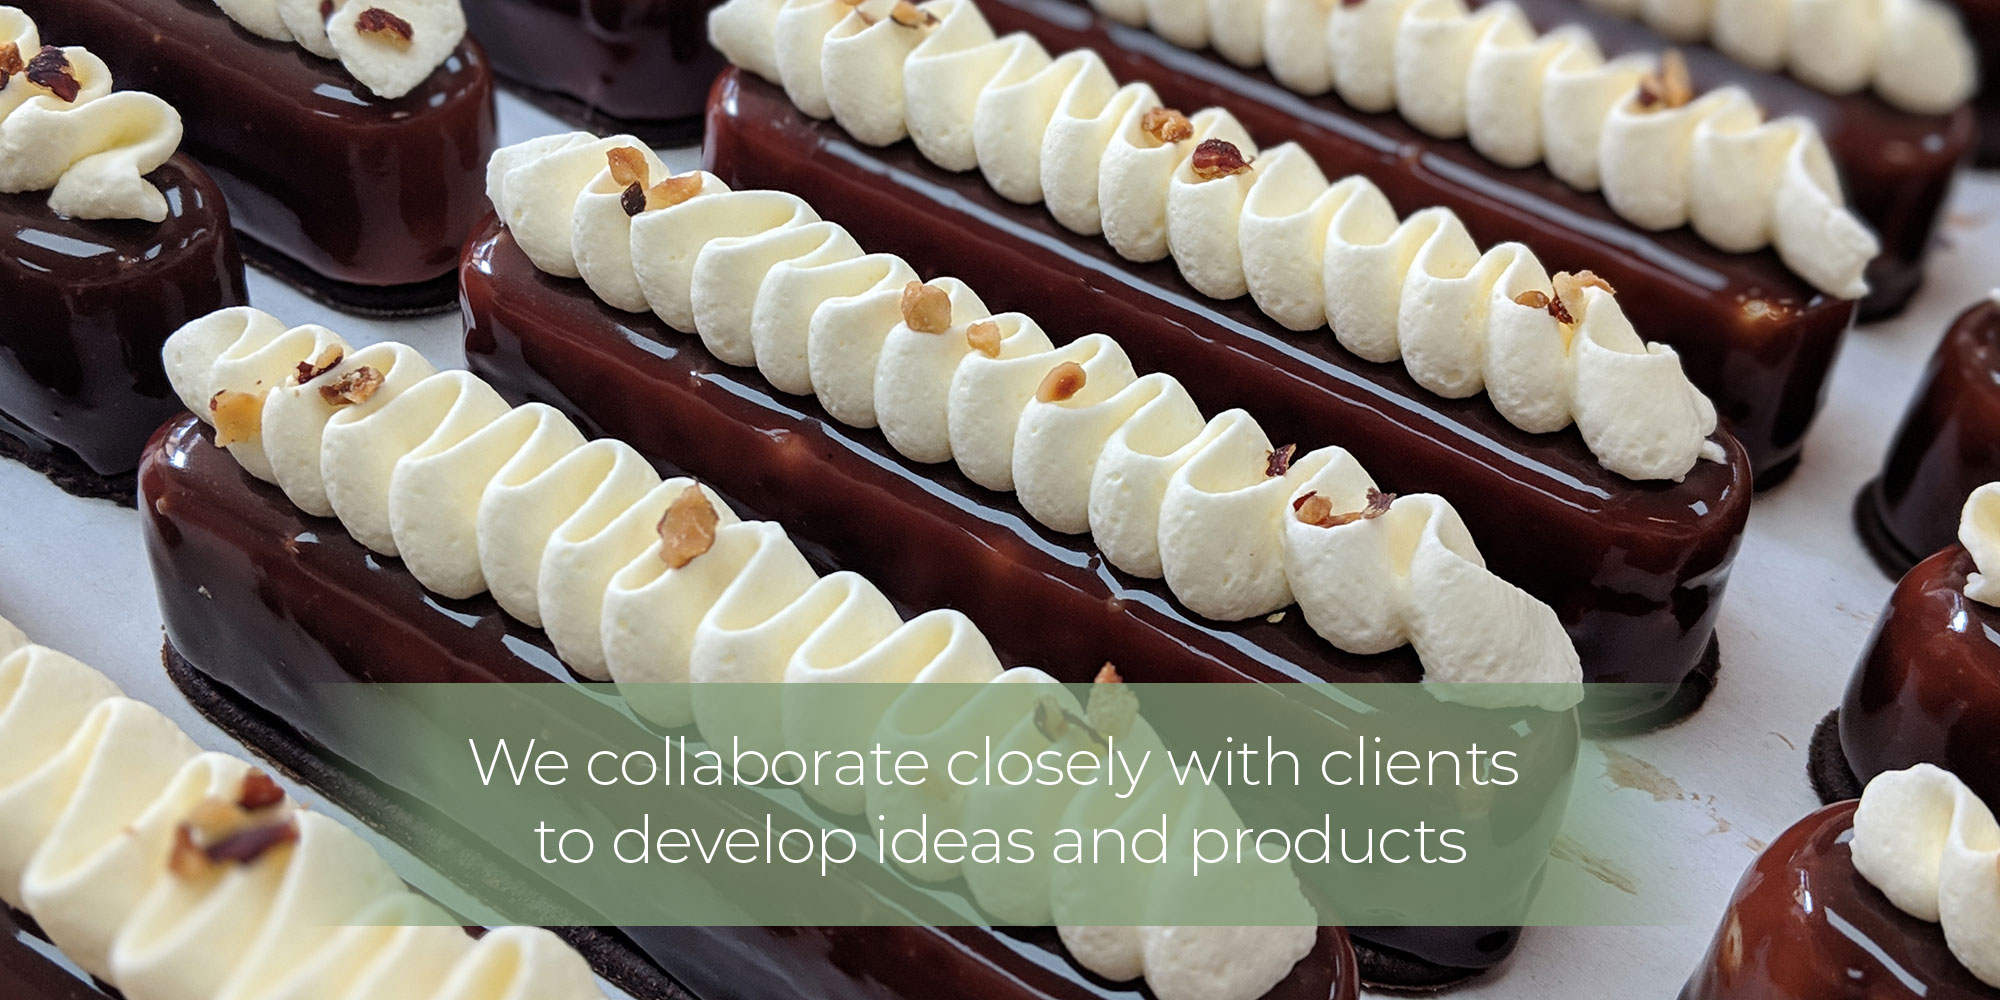 We collaborate closely with clients to develop ideas and products